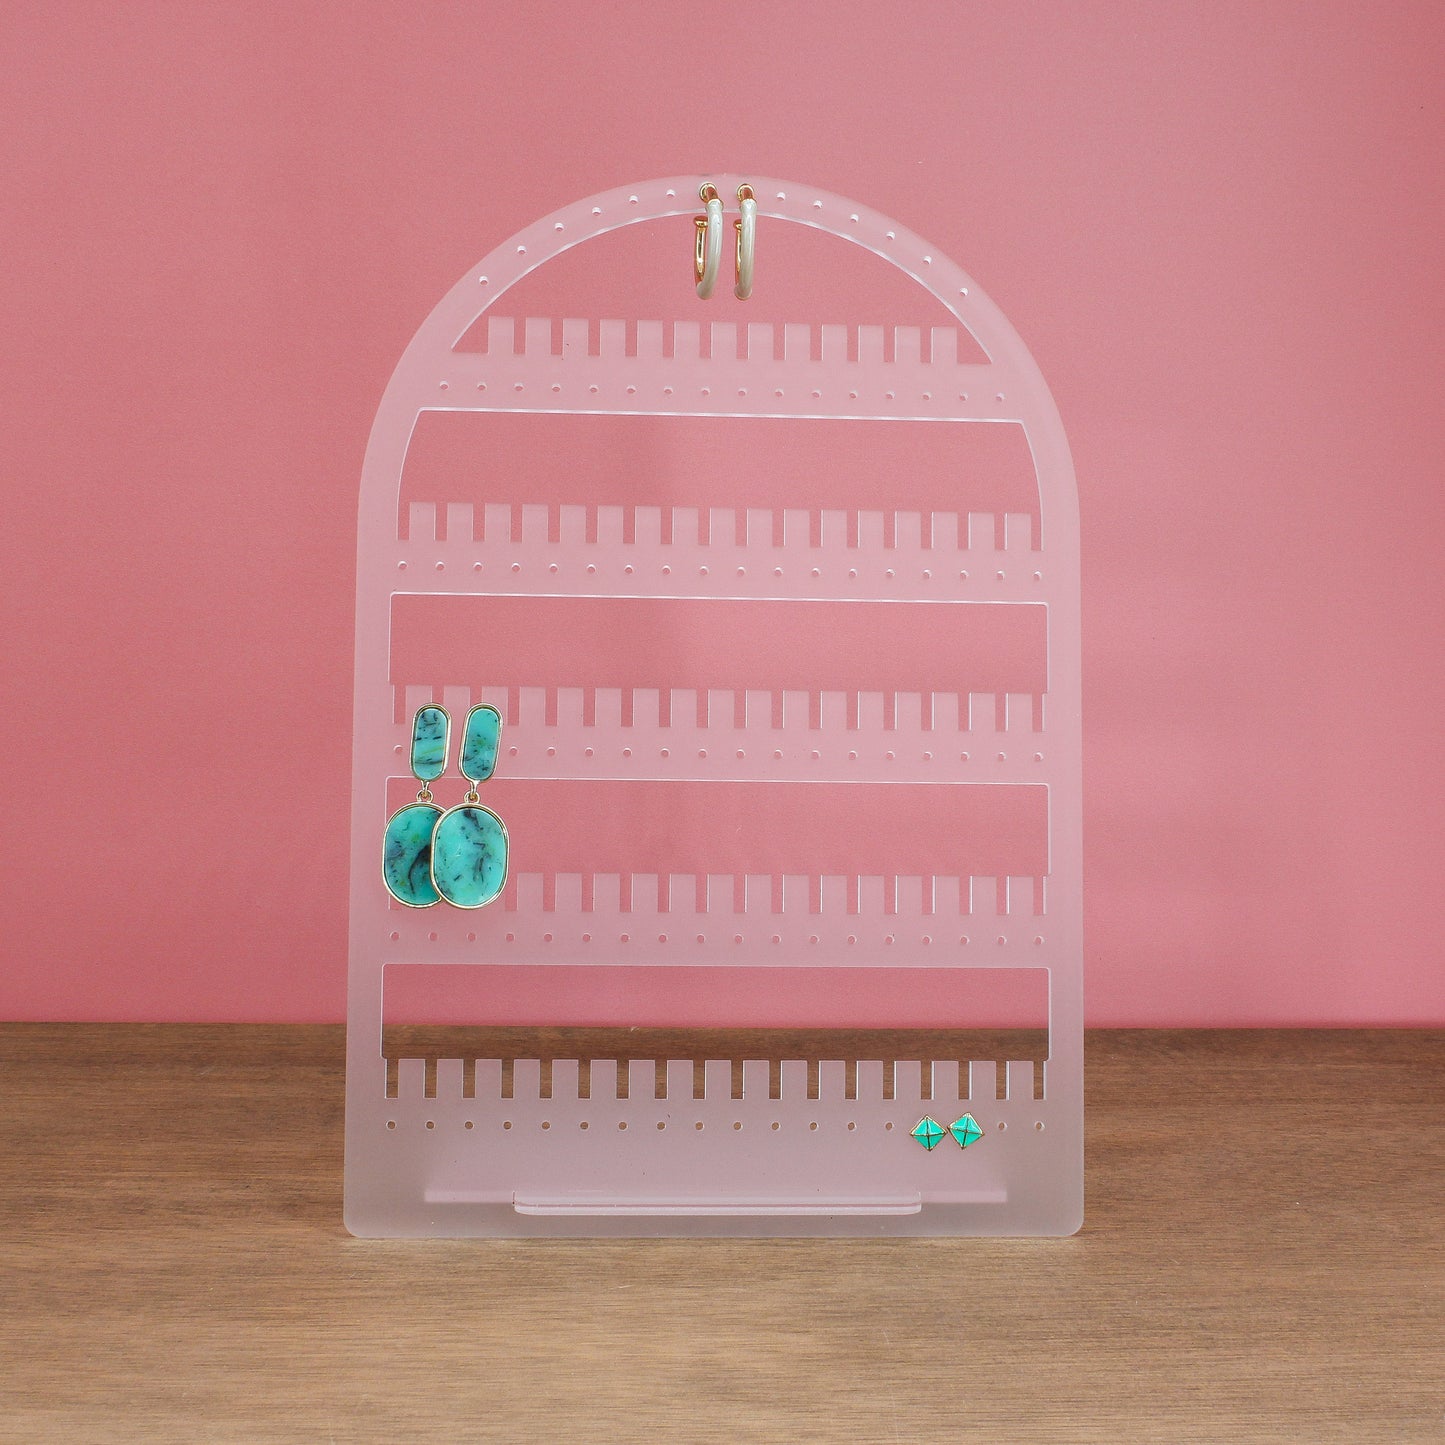 Earring Holder Plate - Frosted Arch Stud Earring Stand - Acrylic Jewellery Display